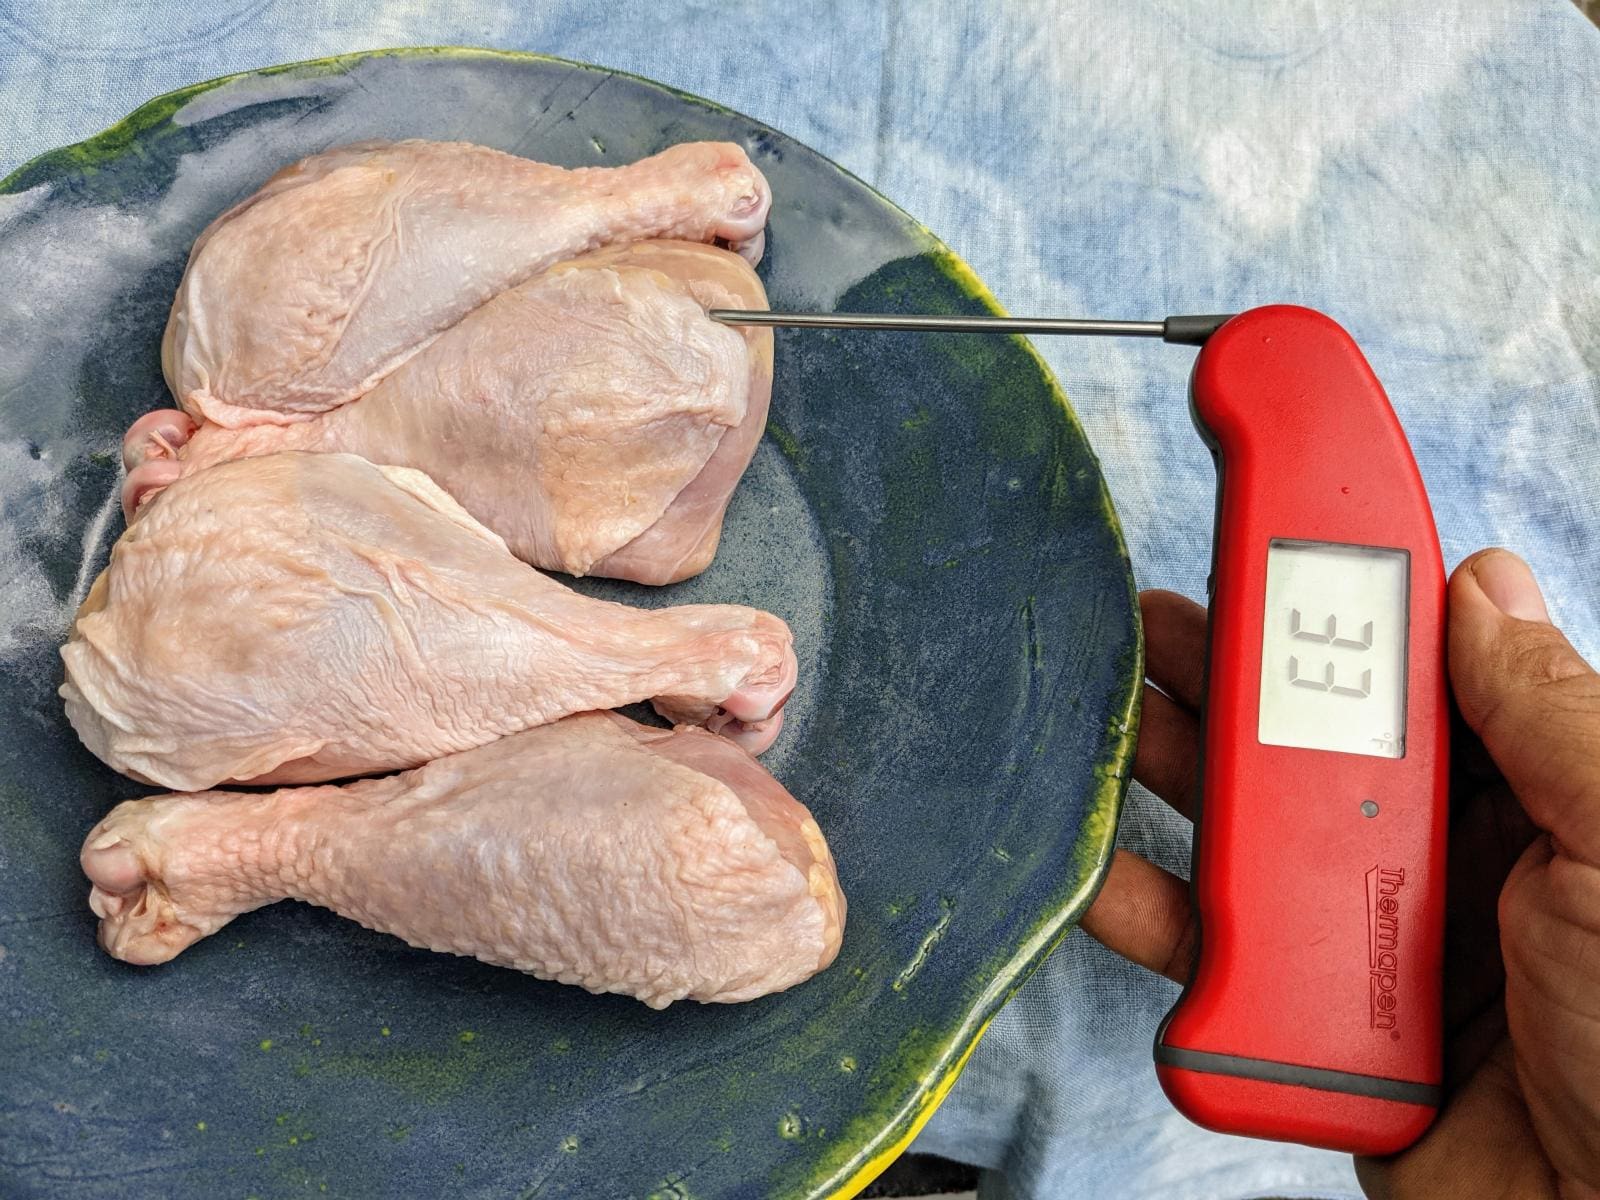 Using an instant read thermometer to check the level of defrosting in four pasture raised chicken breasts.